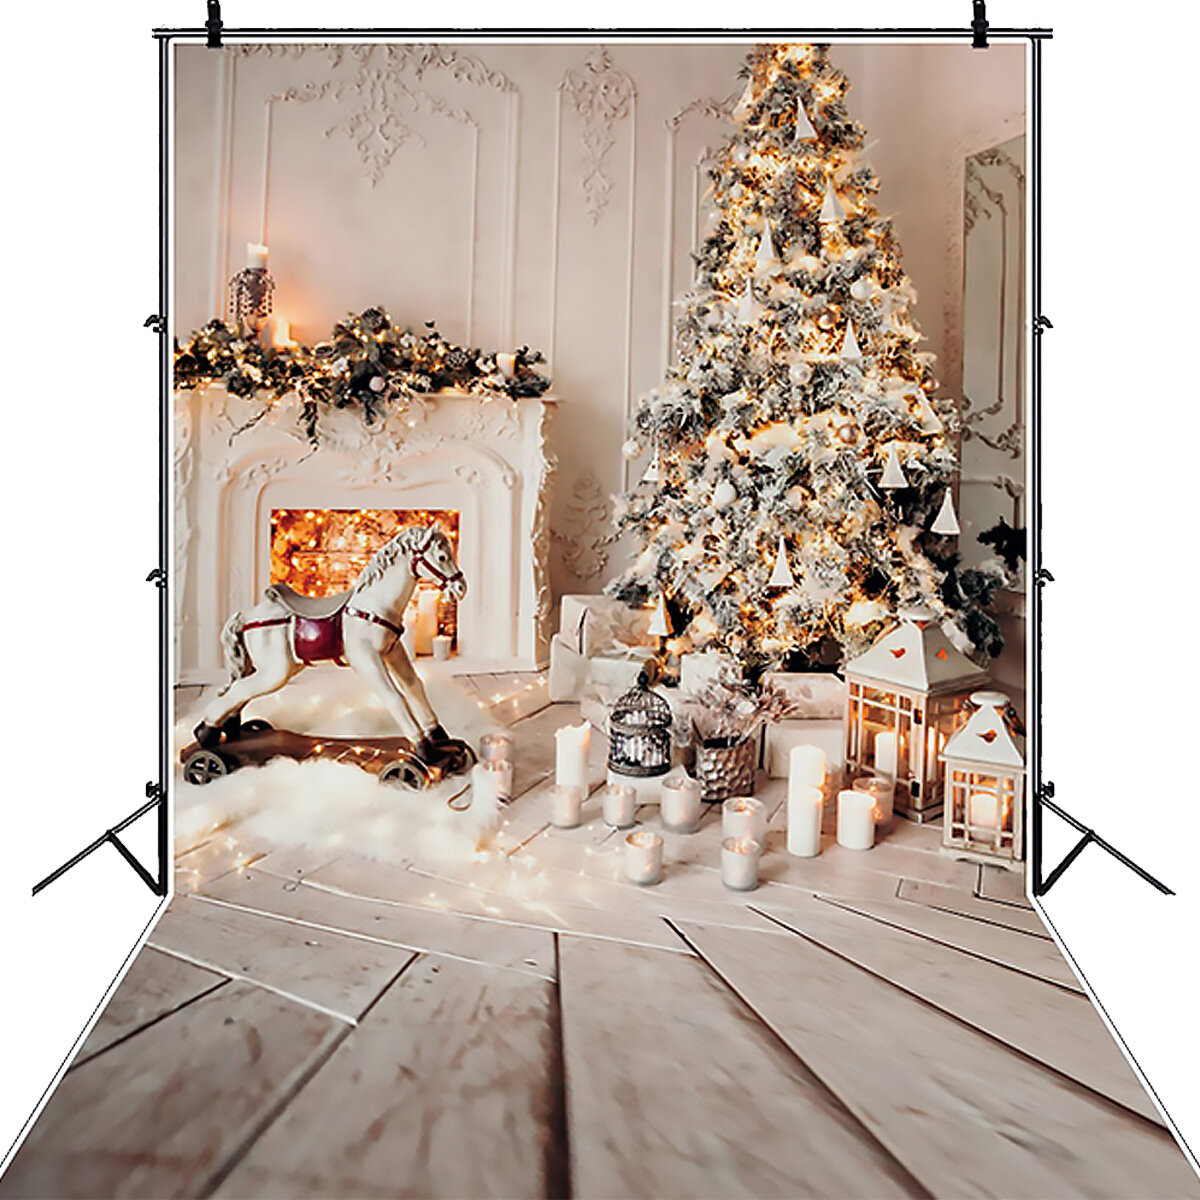 Gray Chic Wall Photo Background Fireplace Winter Christmas Tree Candle Gift Kid Toy Floor Party Phot